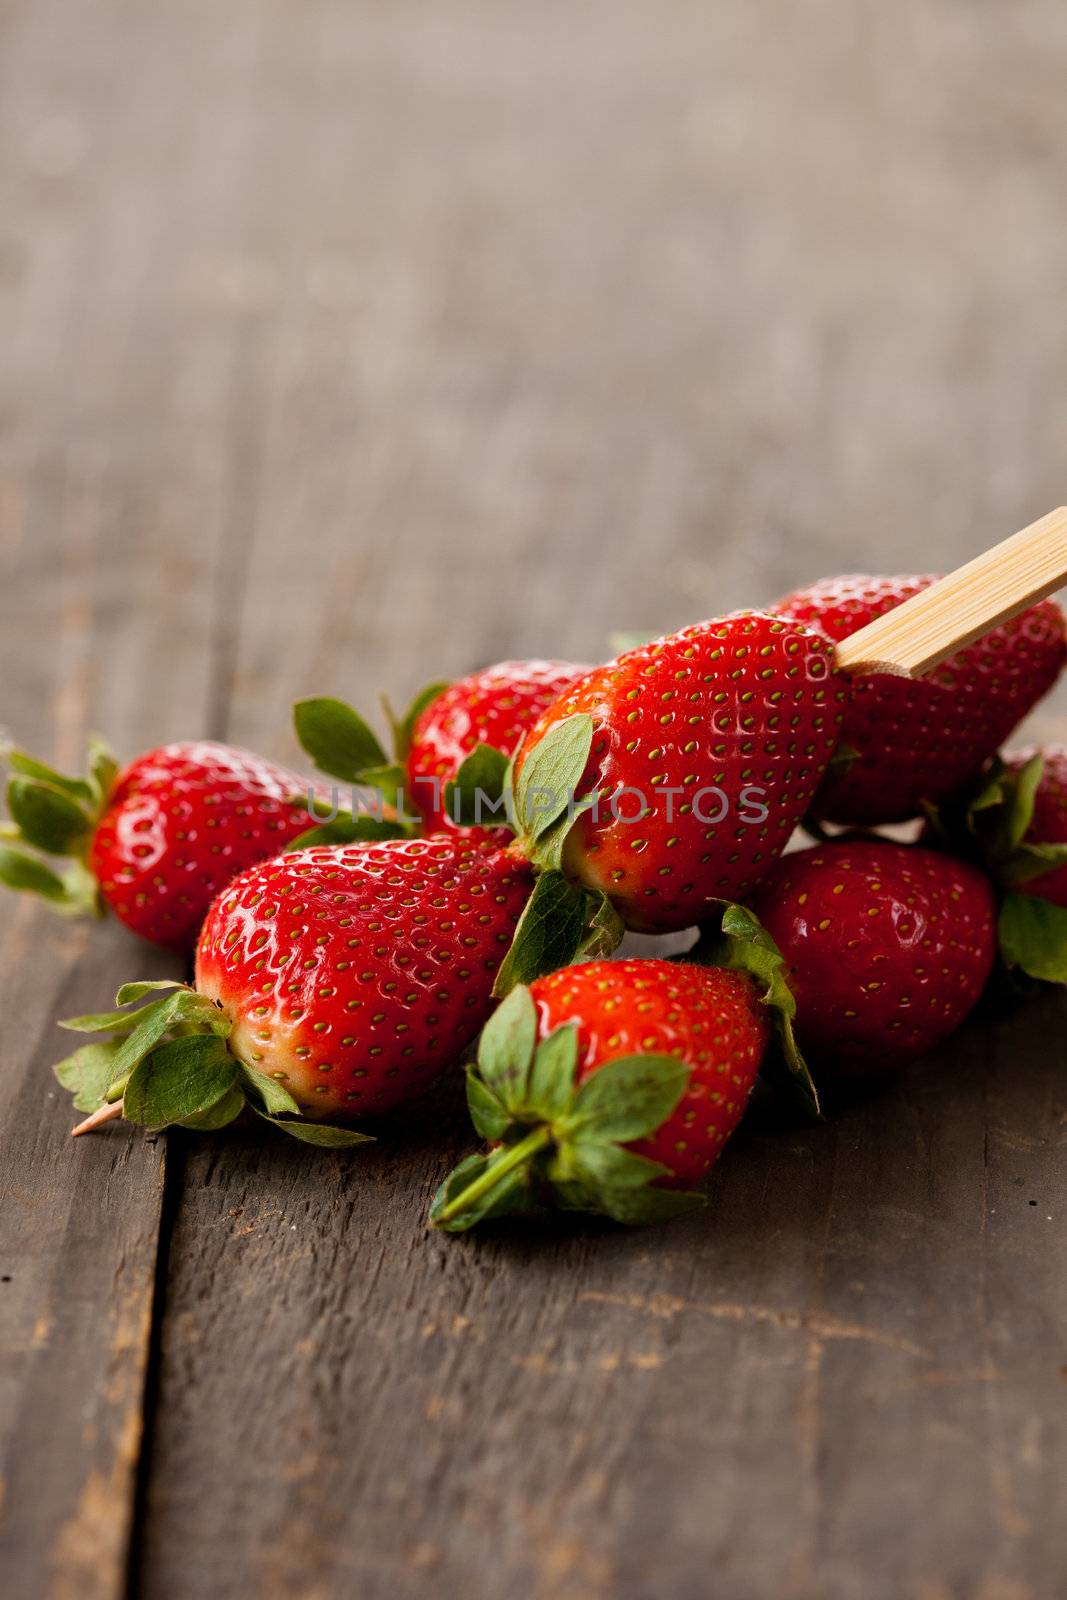 Strawberries on a stick make a healthy snack